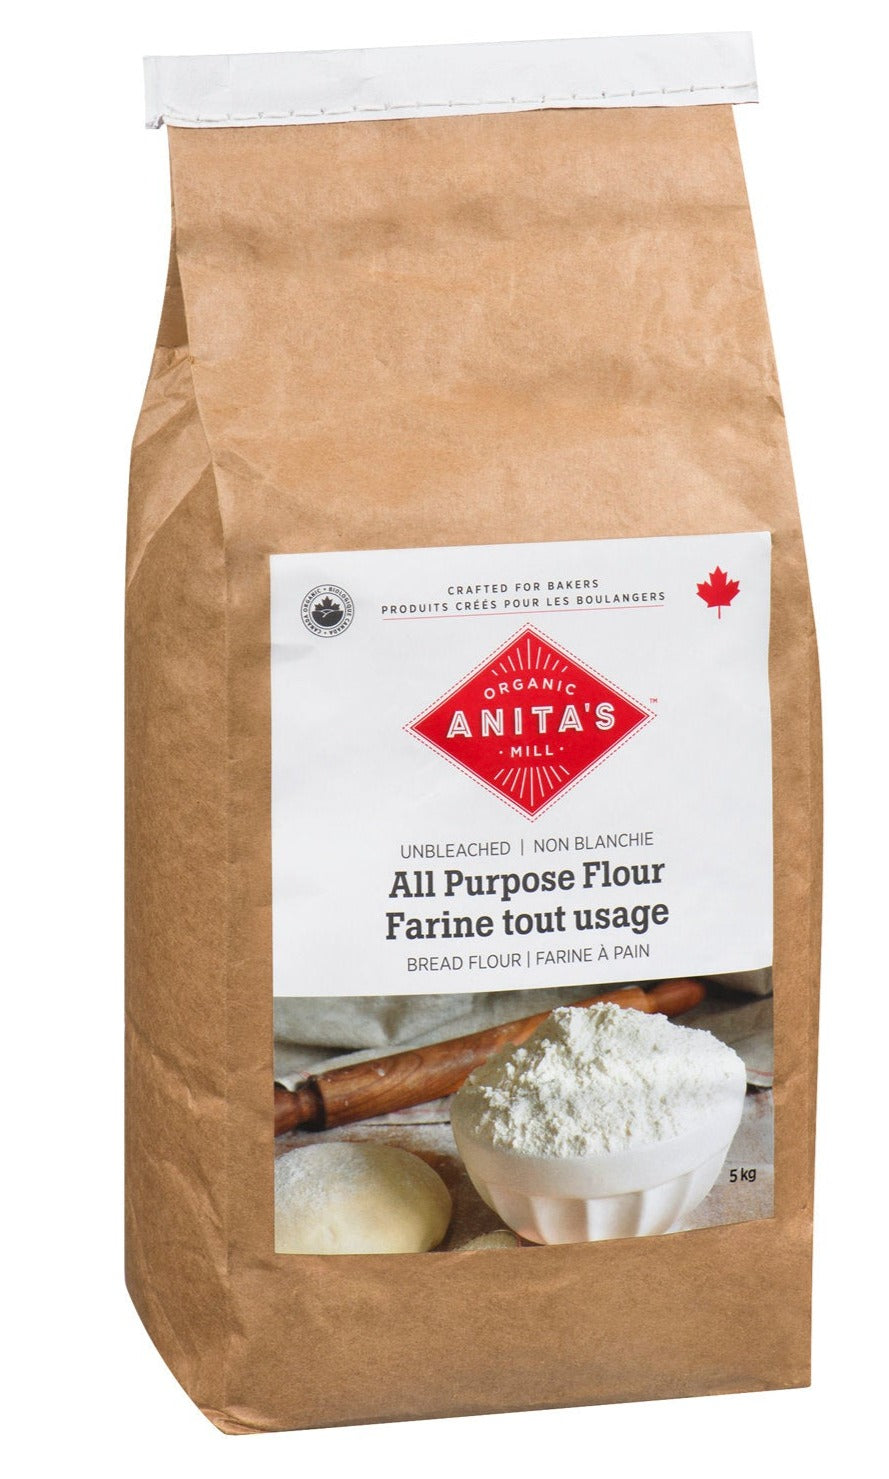 Unbleached All Purpose Flour by Anita’s Mill, 5 kg